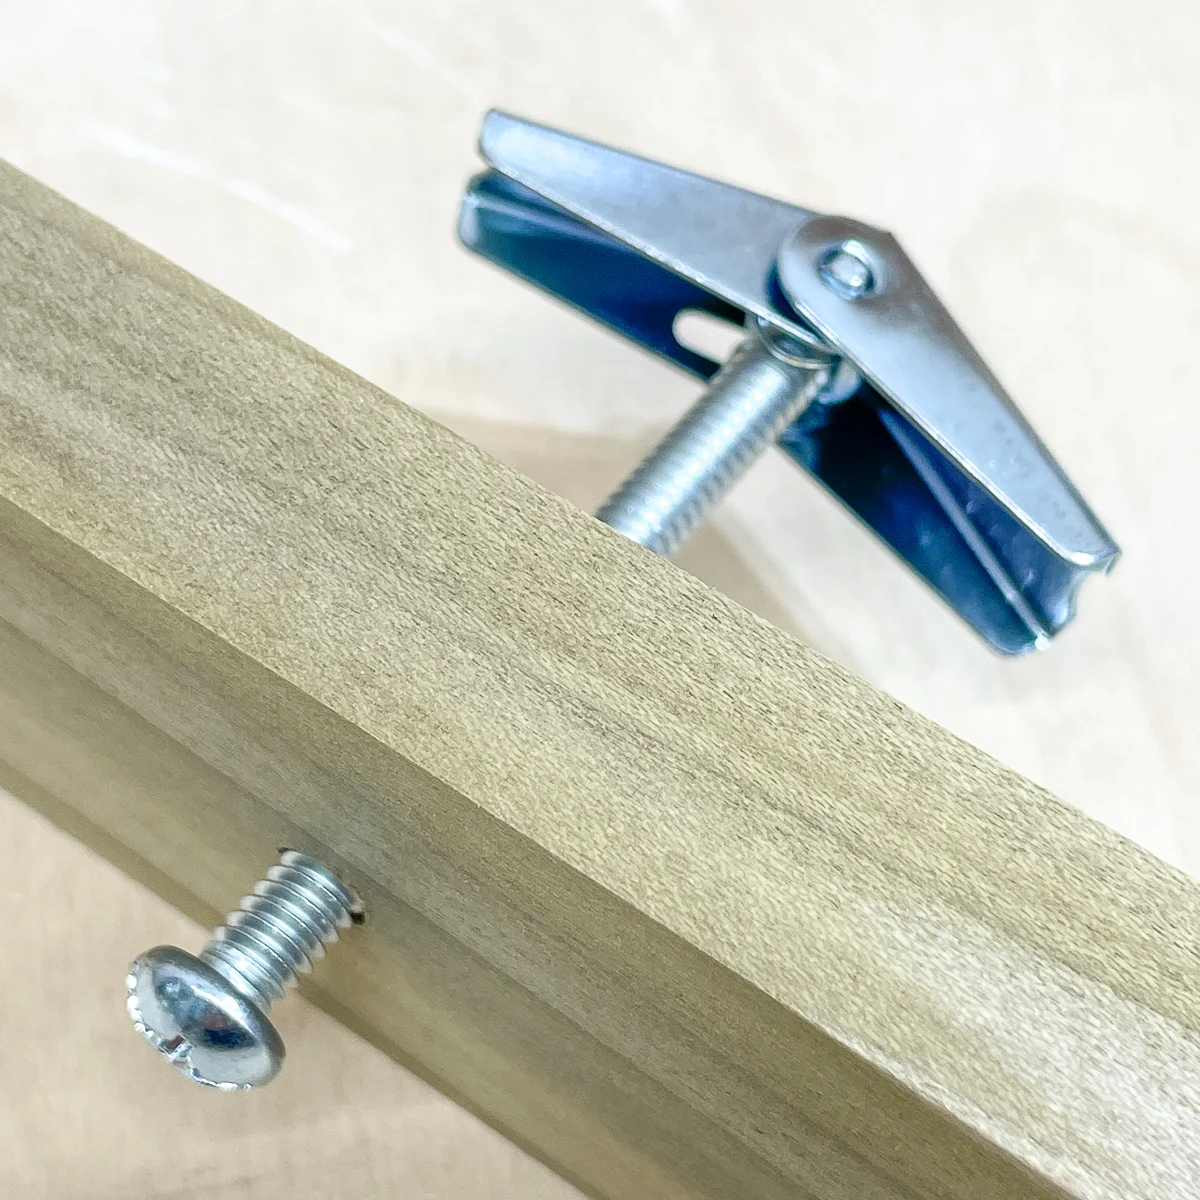 toggle bolt screw through wood with butterfly nut on the end